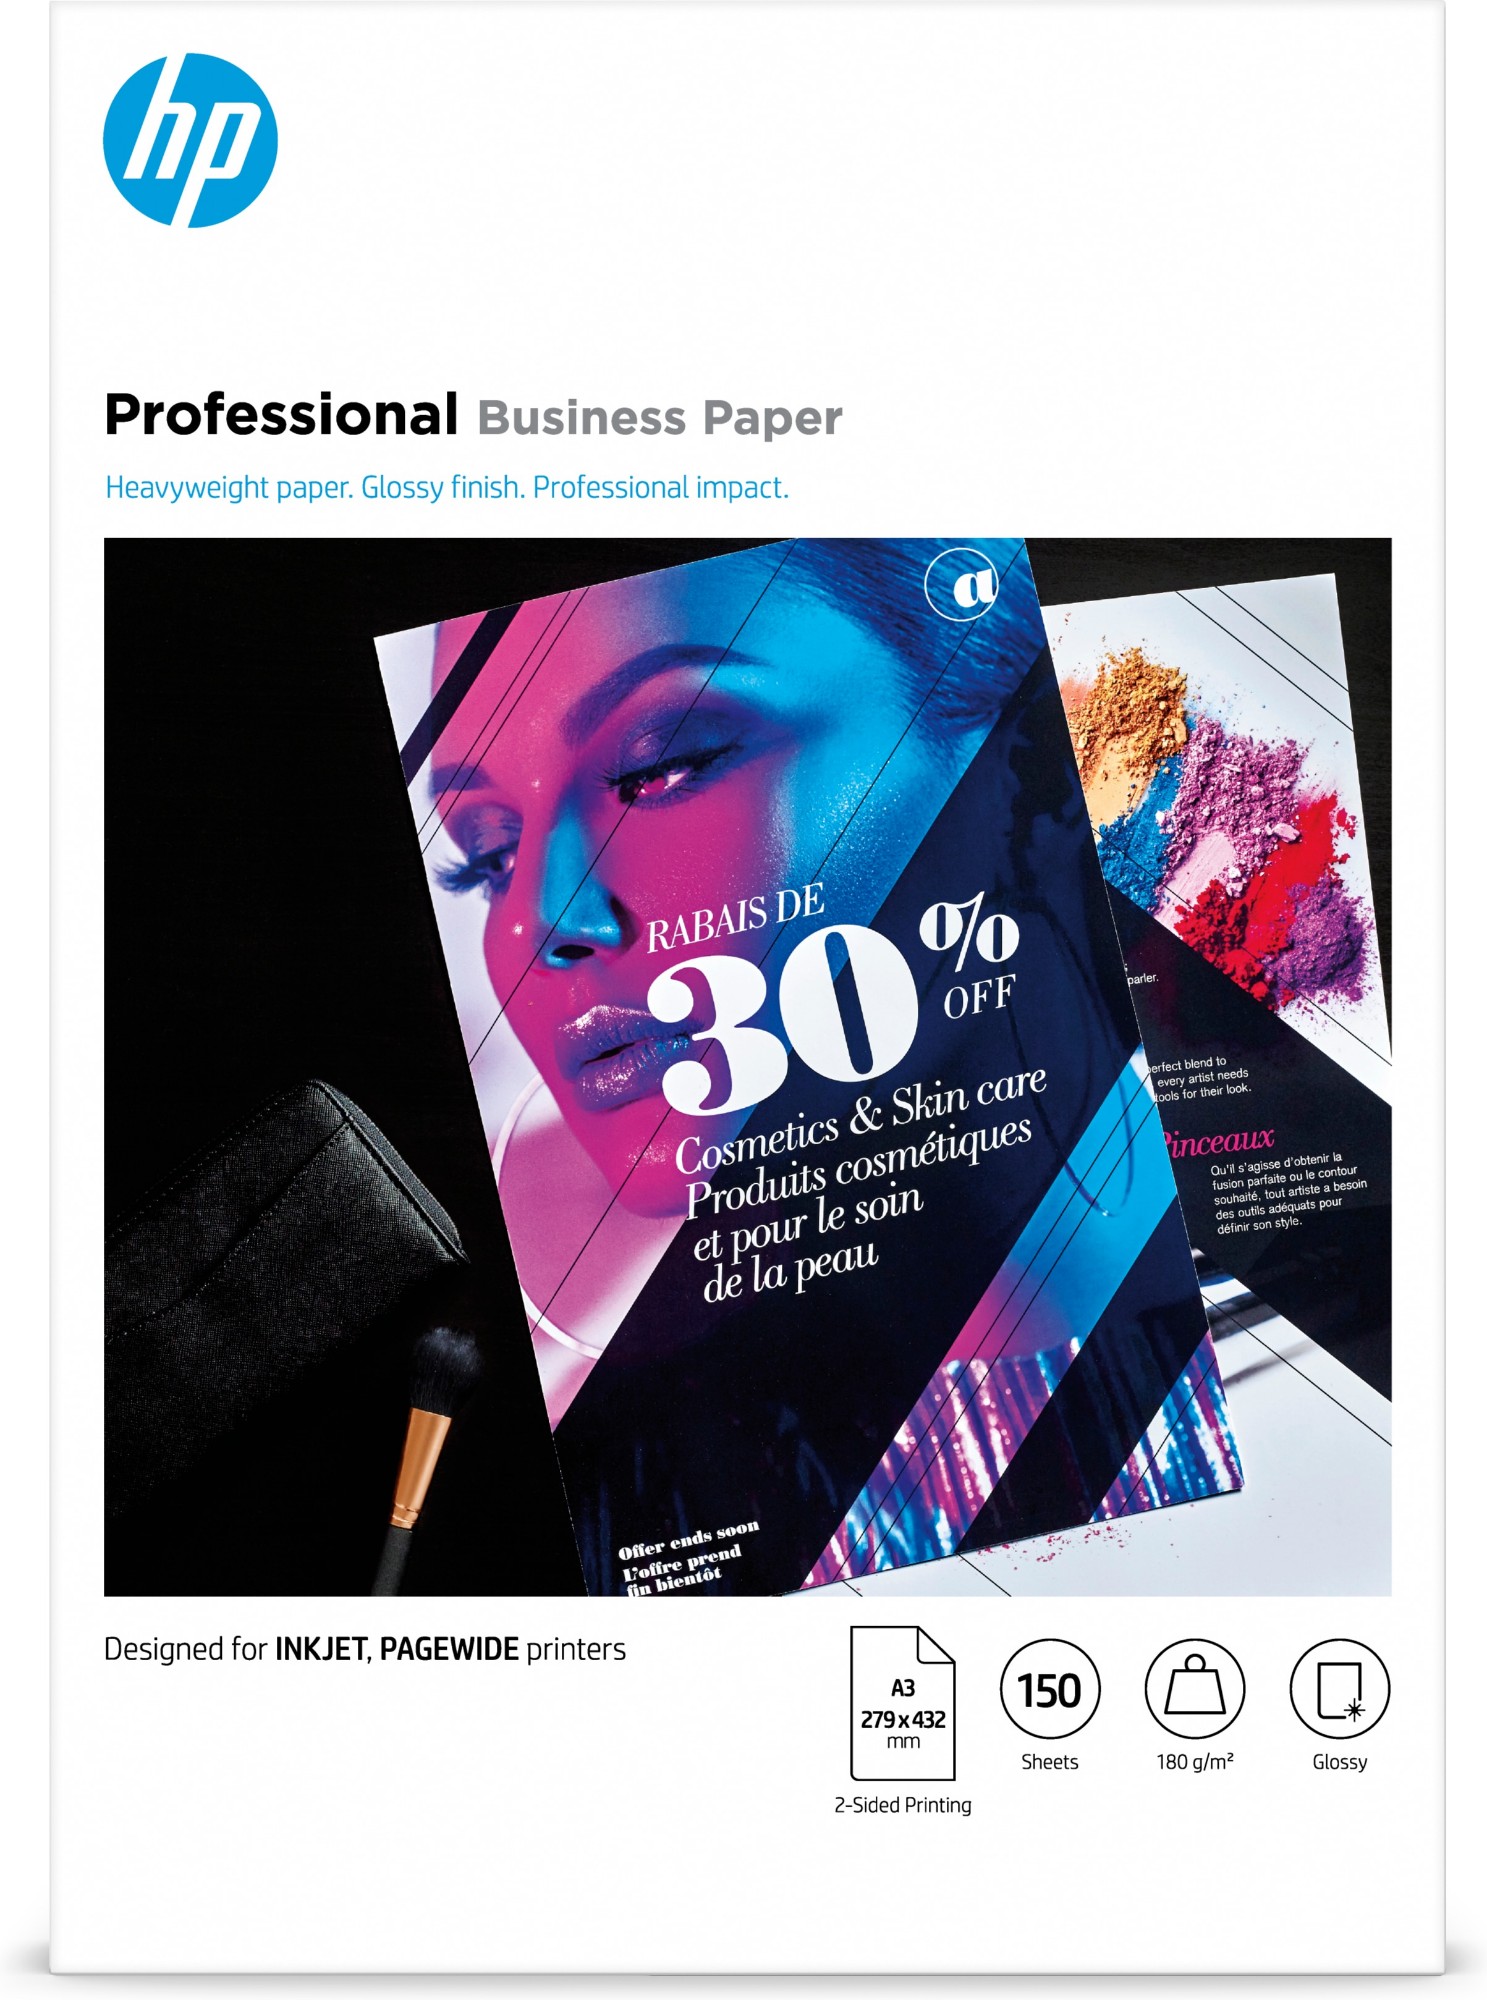 HP Professional Business Paper, Glossy, 180 g/m2, A3 (297 x 420 mm), 150 sheets